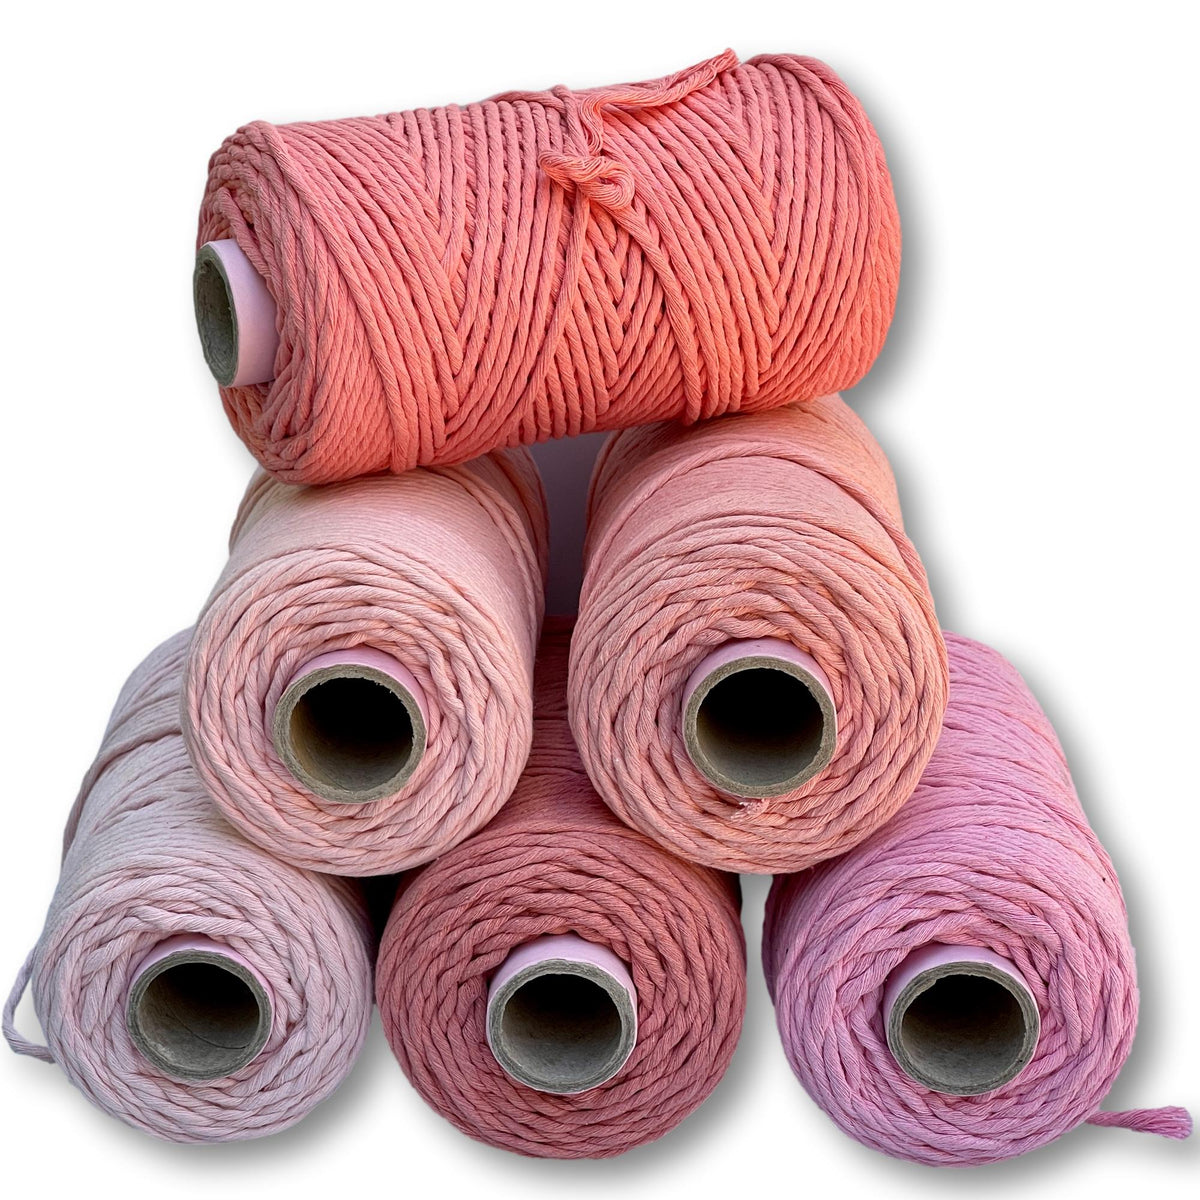 Recycled 4mm Cotton String - (4mm) 500g Cone [Discontinued]